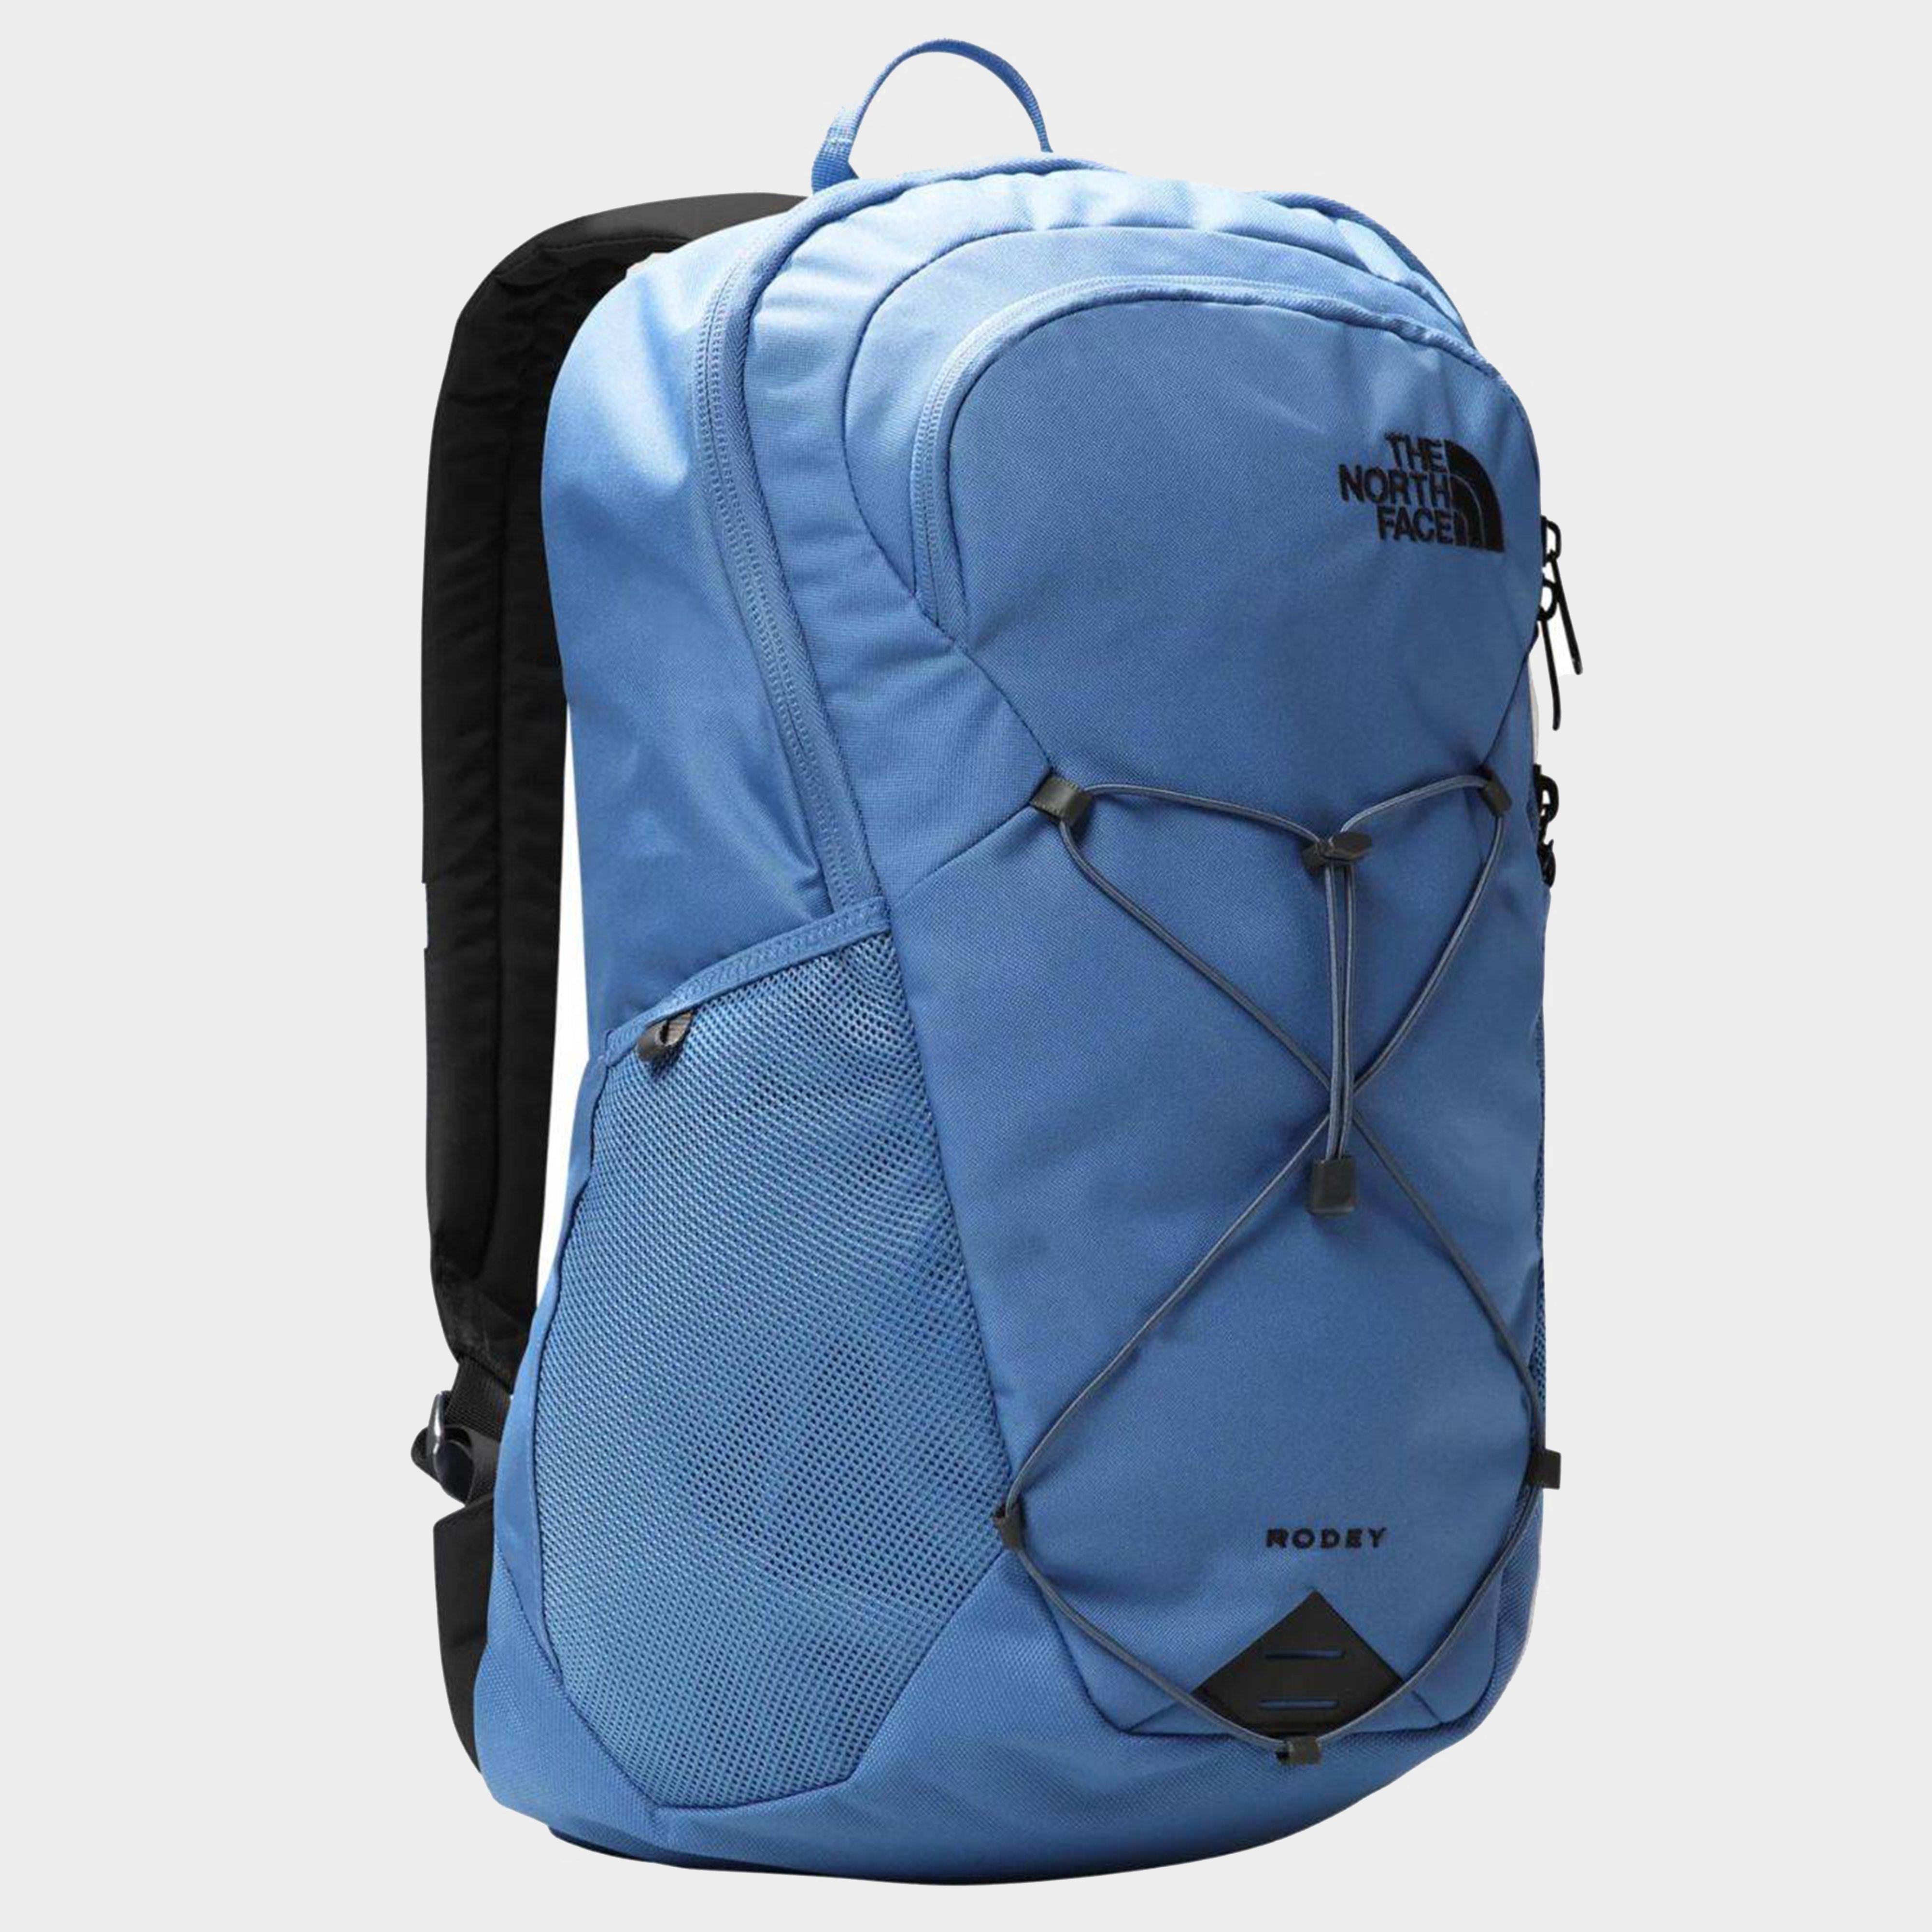 The North Face Rodey Backpack - Light Blue/light Blue  Light Blue/light Blue